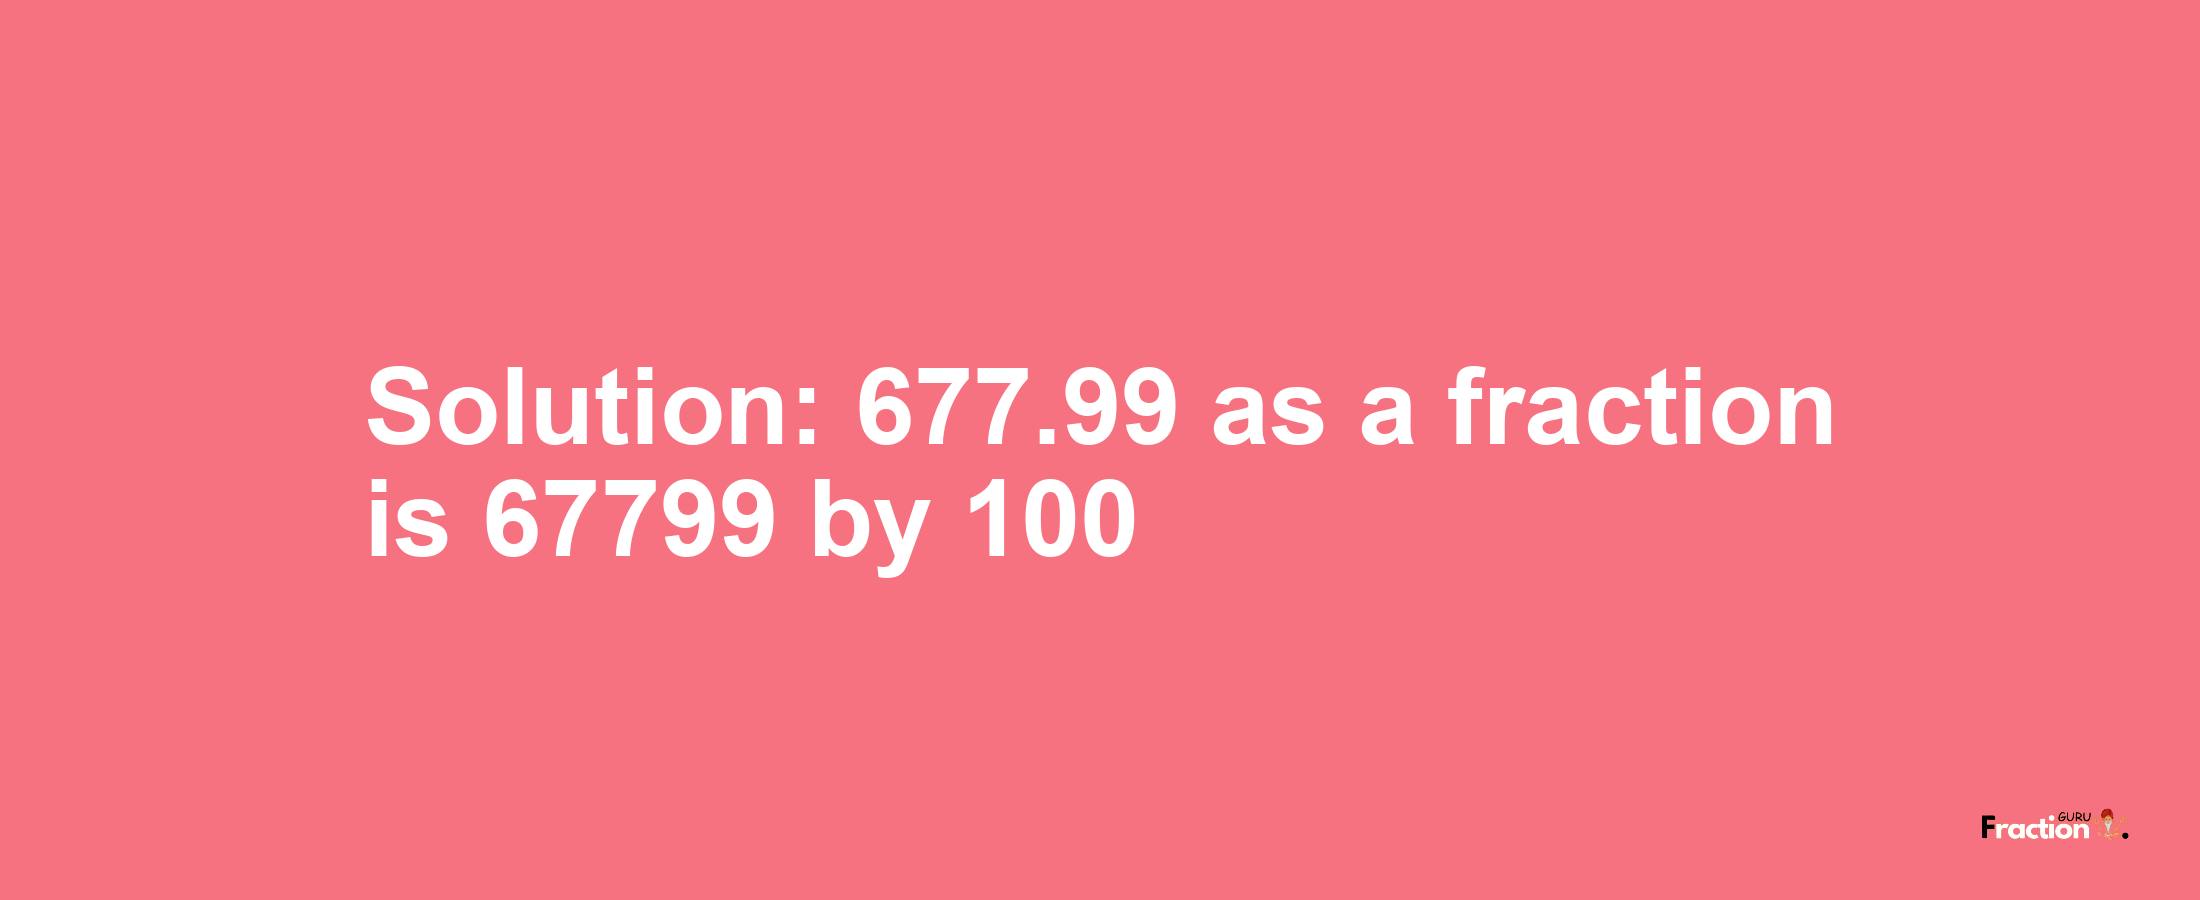 Solution:677.99 as a fraction is 67799/100